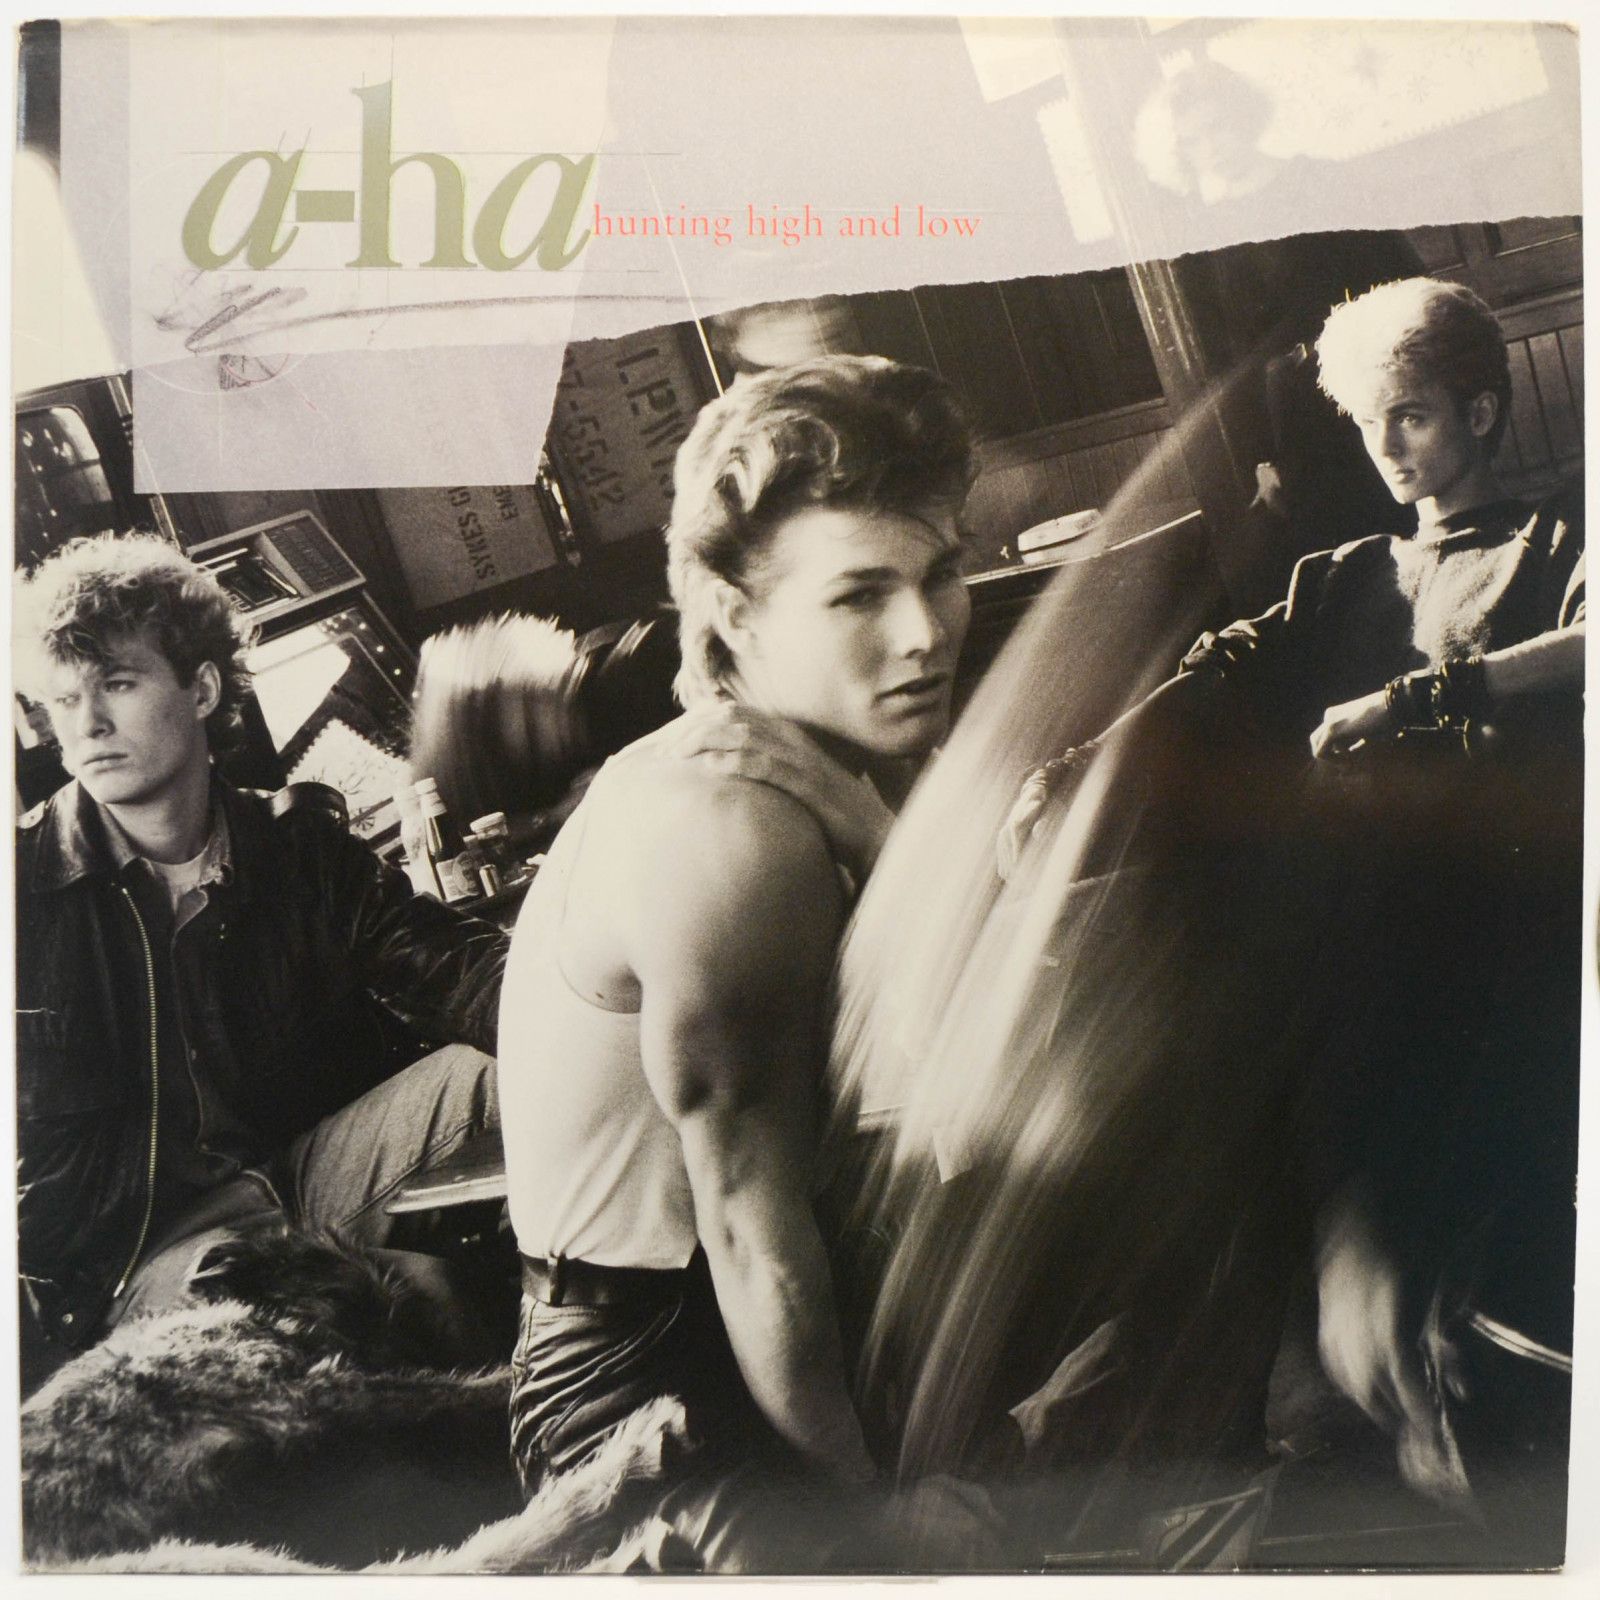 a-ha — Hunting High And Low, 1985